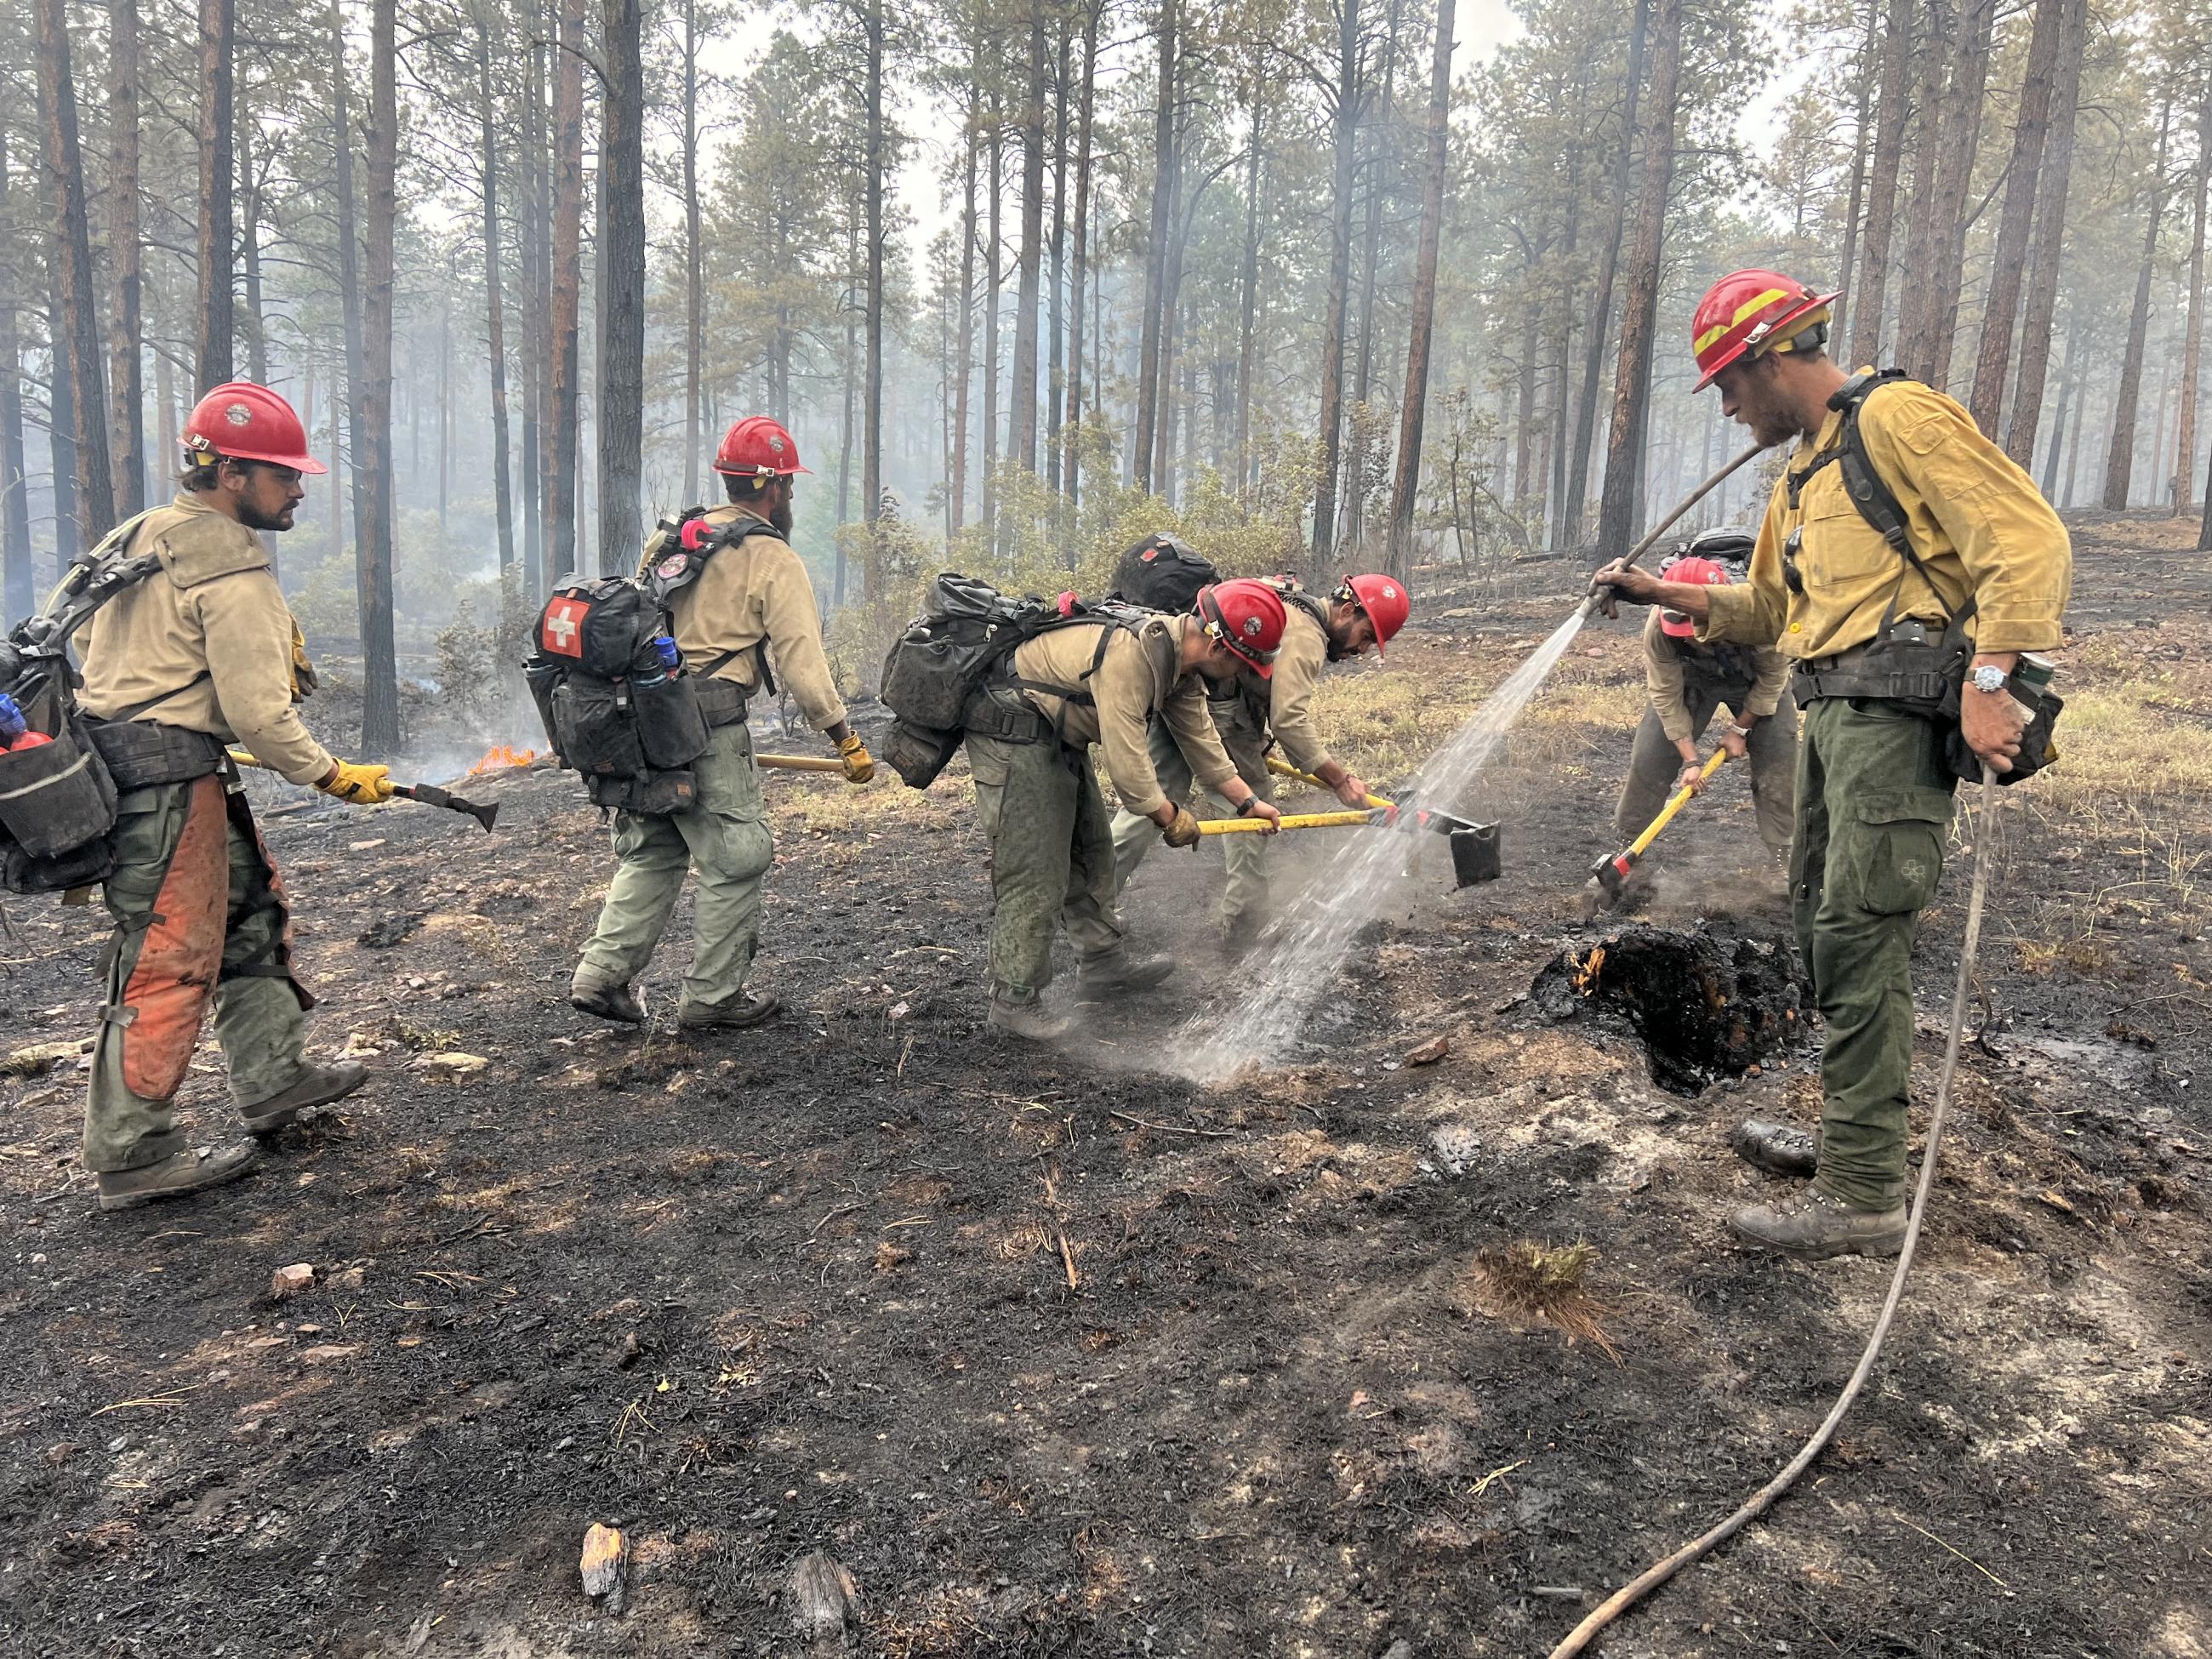 A group of firefighters in red helmets are seen. One uses a small hose to dose a hole left when a stump burned away.